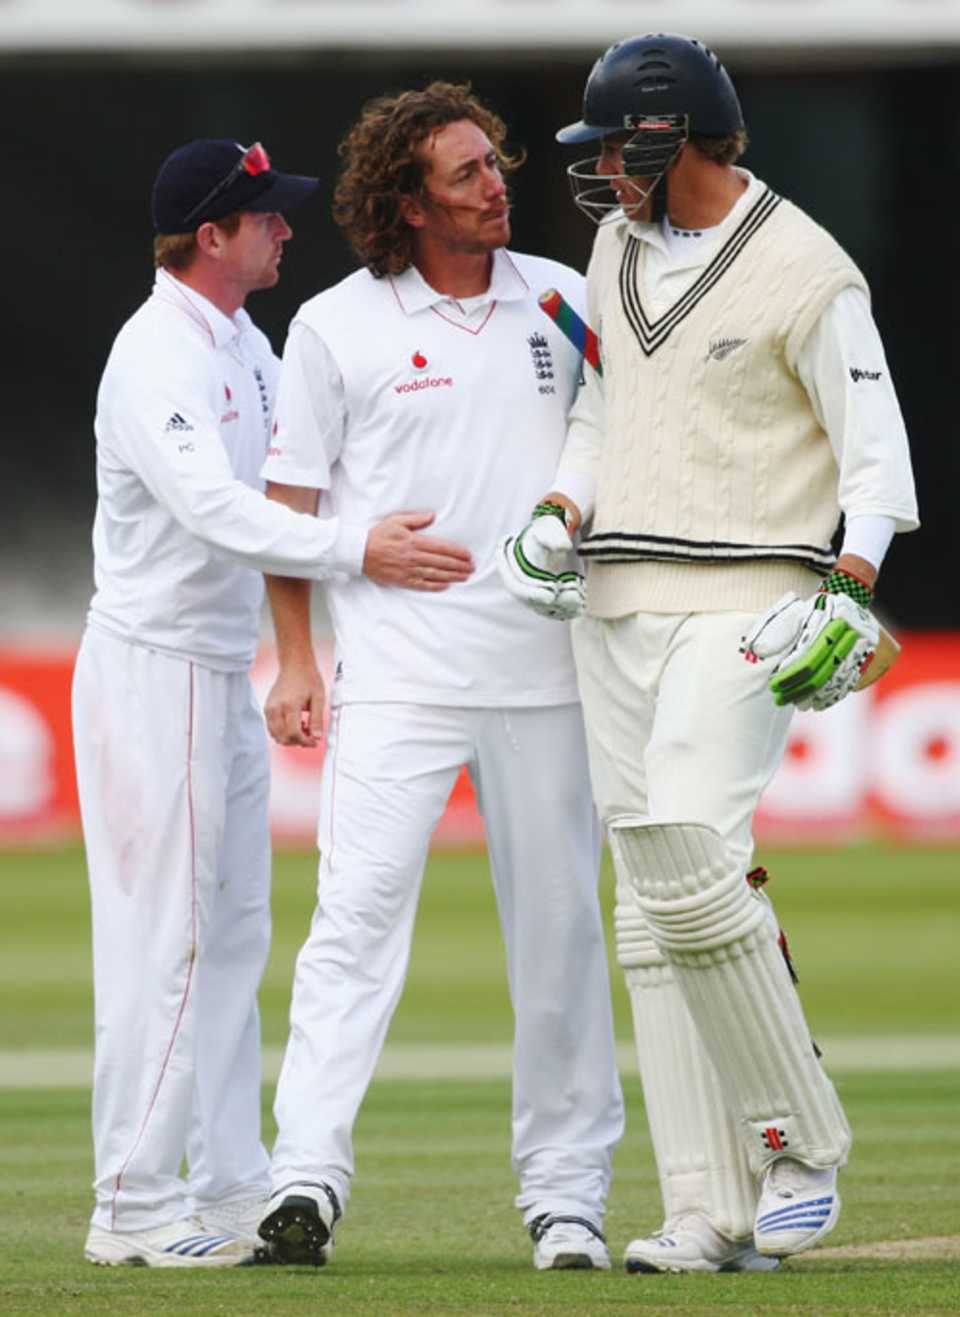 Ryan Sidebottom and Paul Collingwood congratulate Jacob Oram on his innings of 101, England v New Zealand, 1st Test, Lord's, May 19, 2008